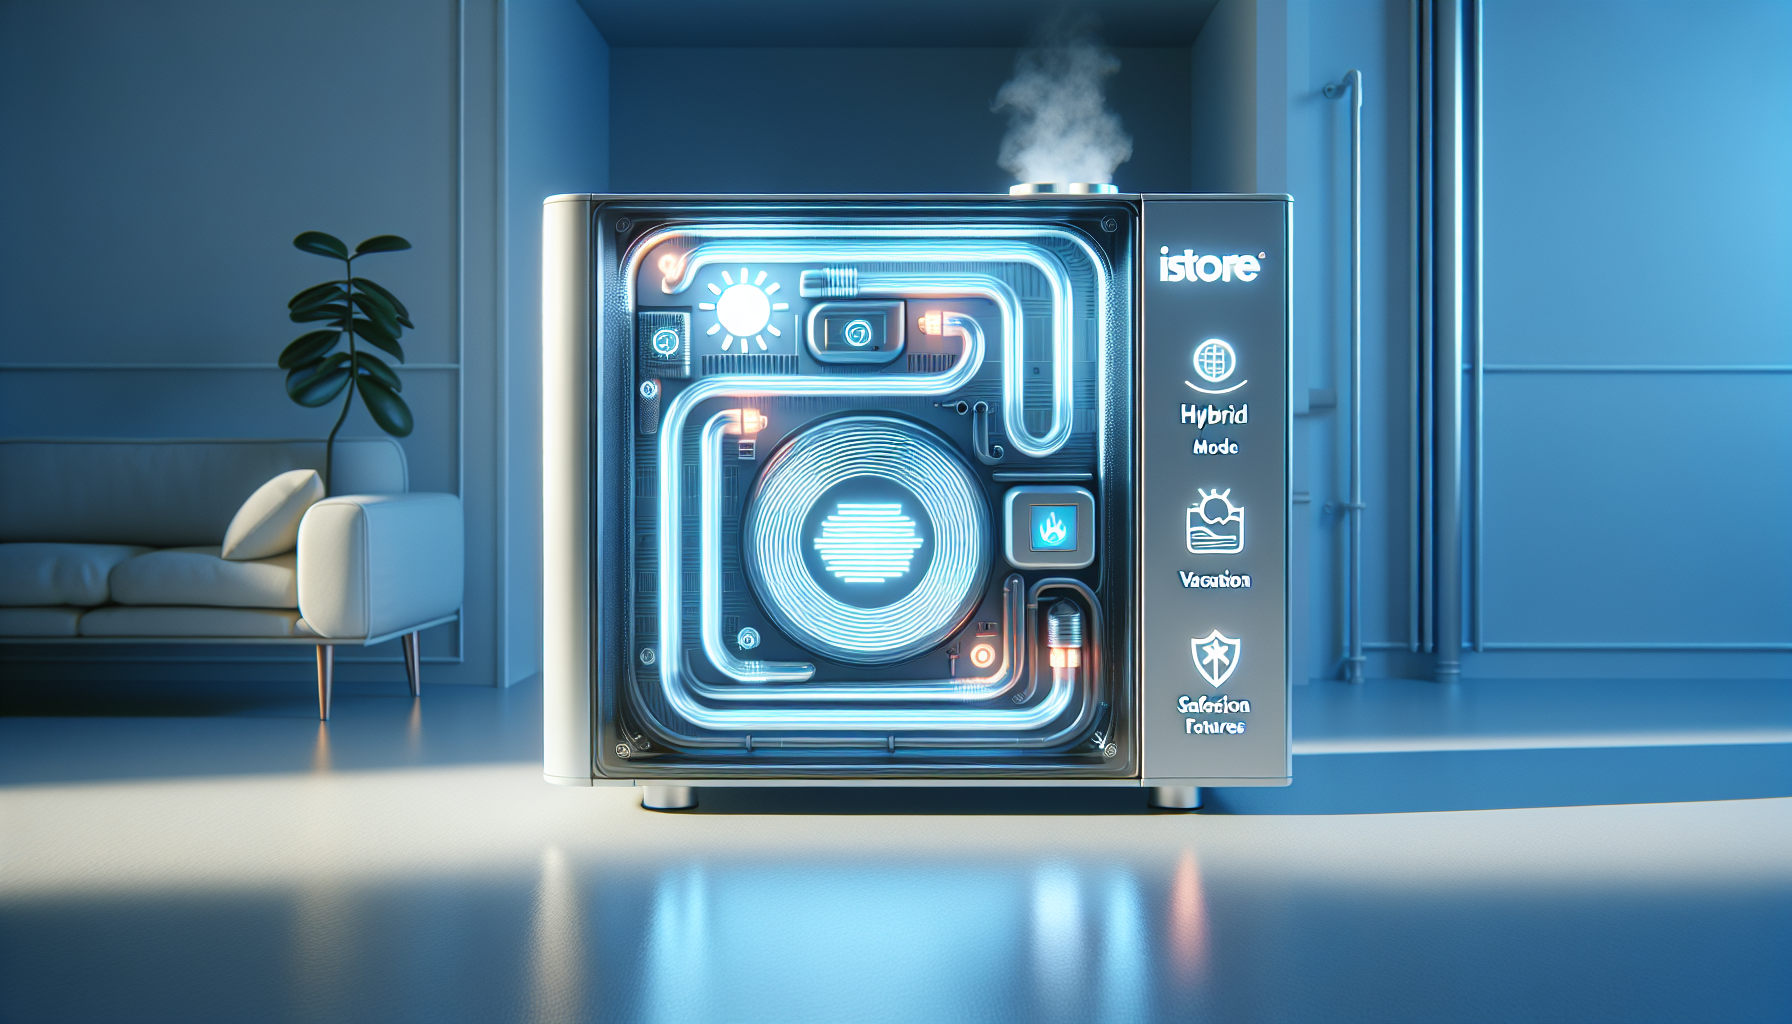 Innovative features of iStore heat pumps